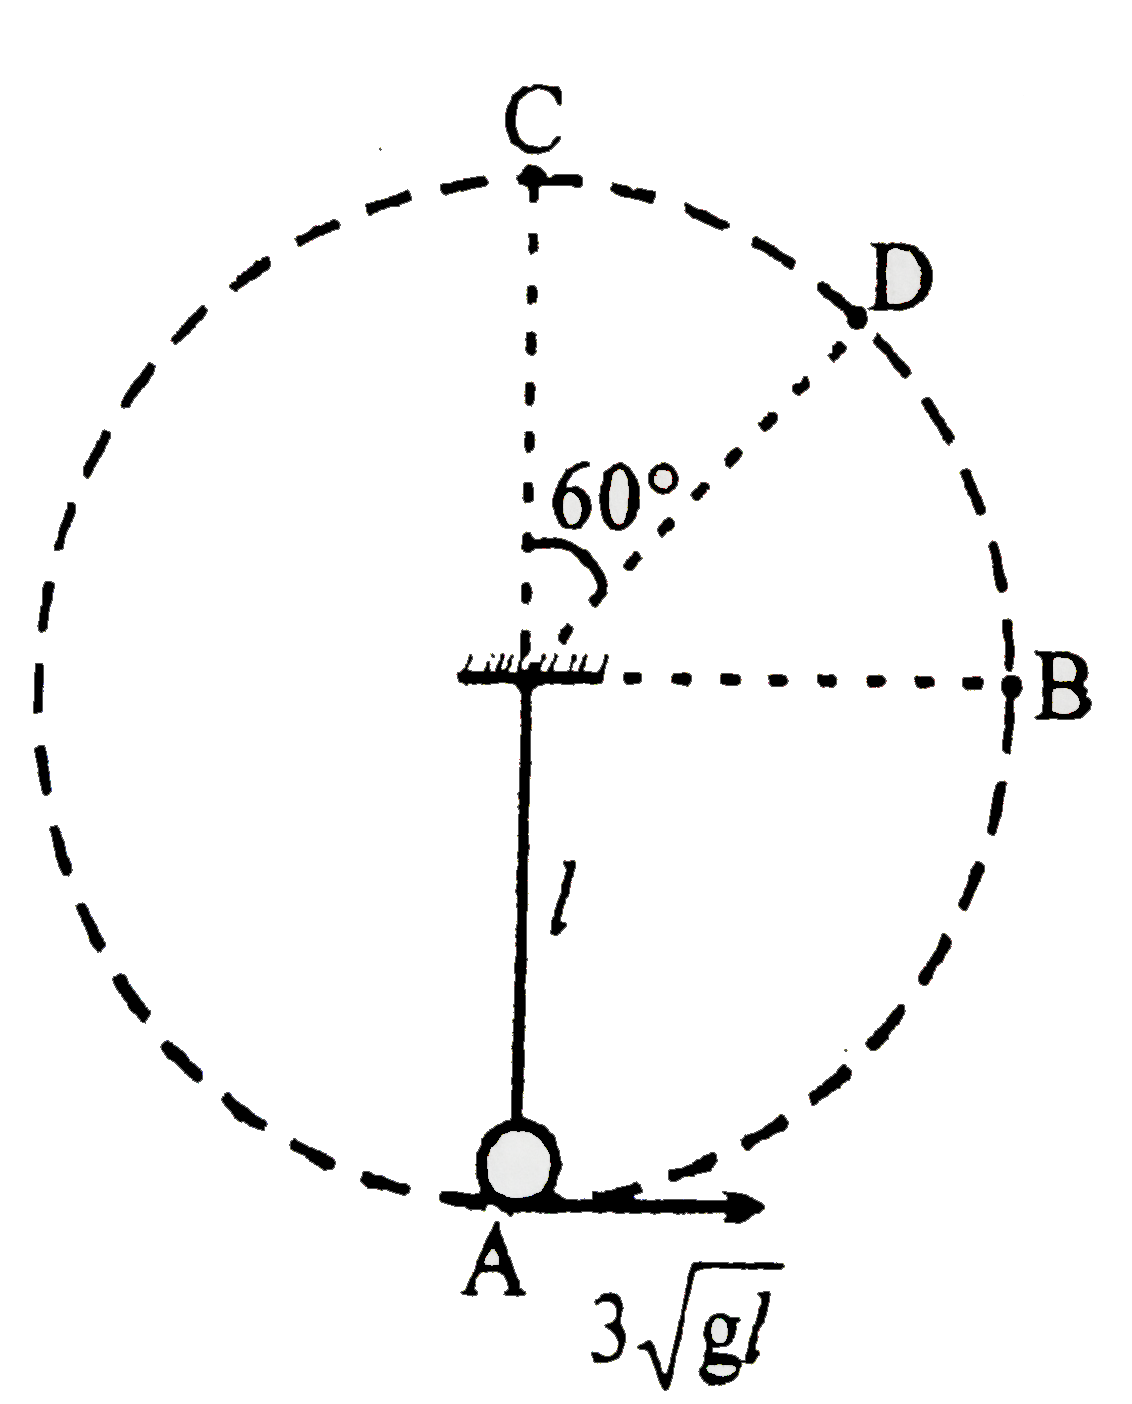 Velocity time graph of a particle in straight liine motion is in shape of a semicircle of radius R as shown in figure Its averge acceleration from t = 0 to t = R is :